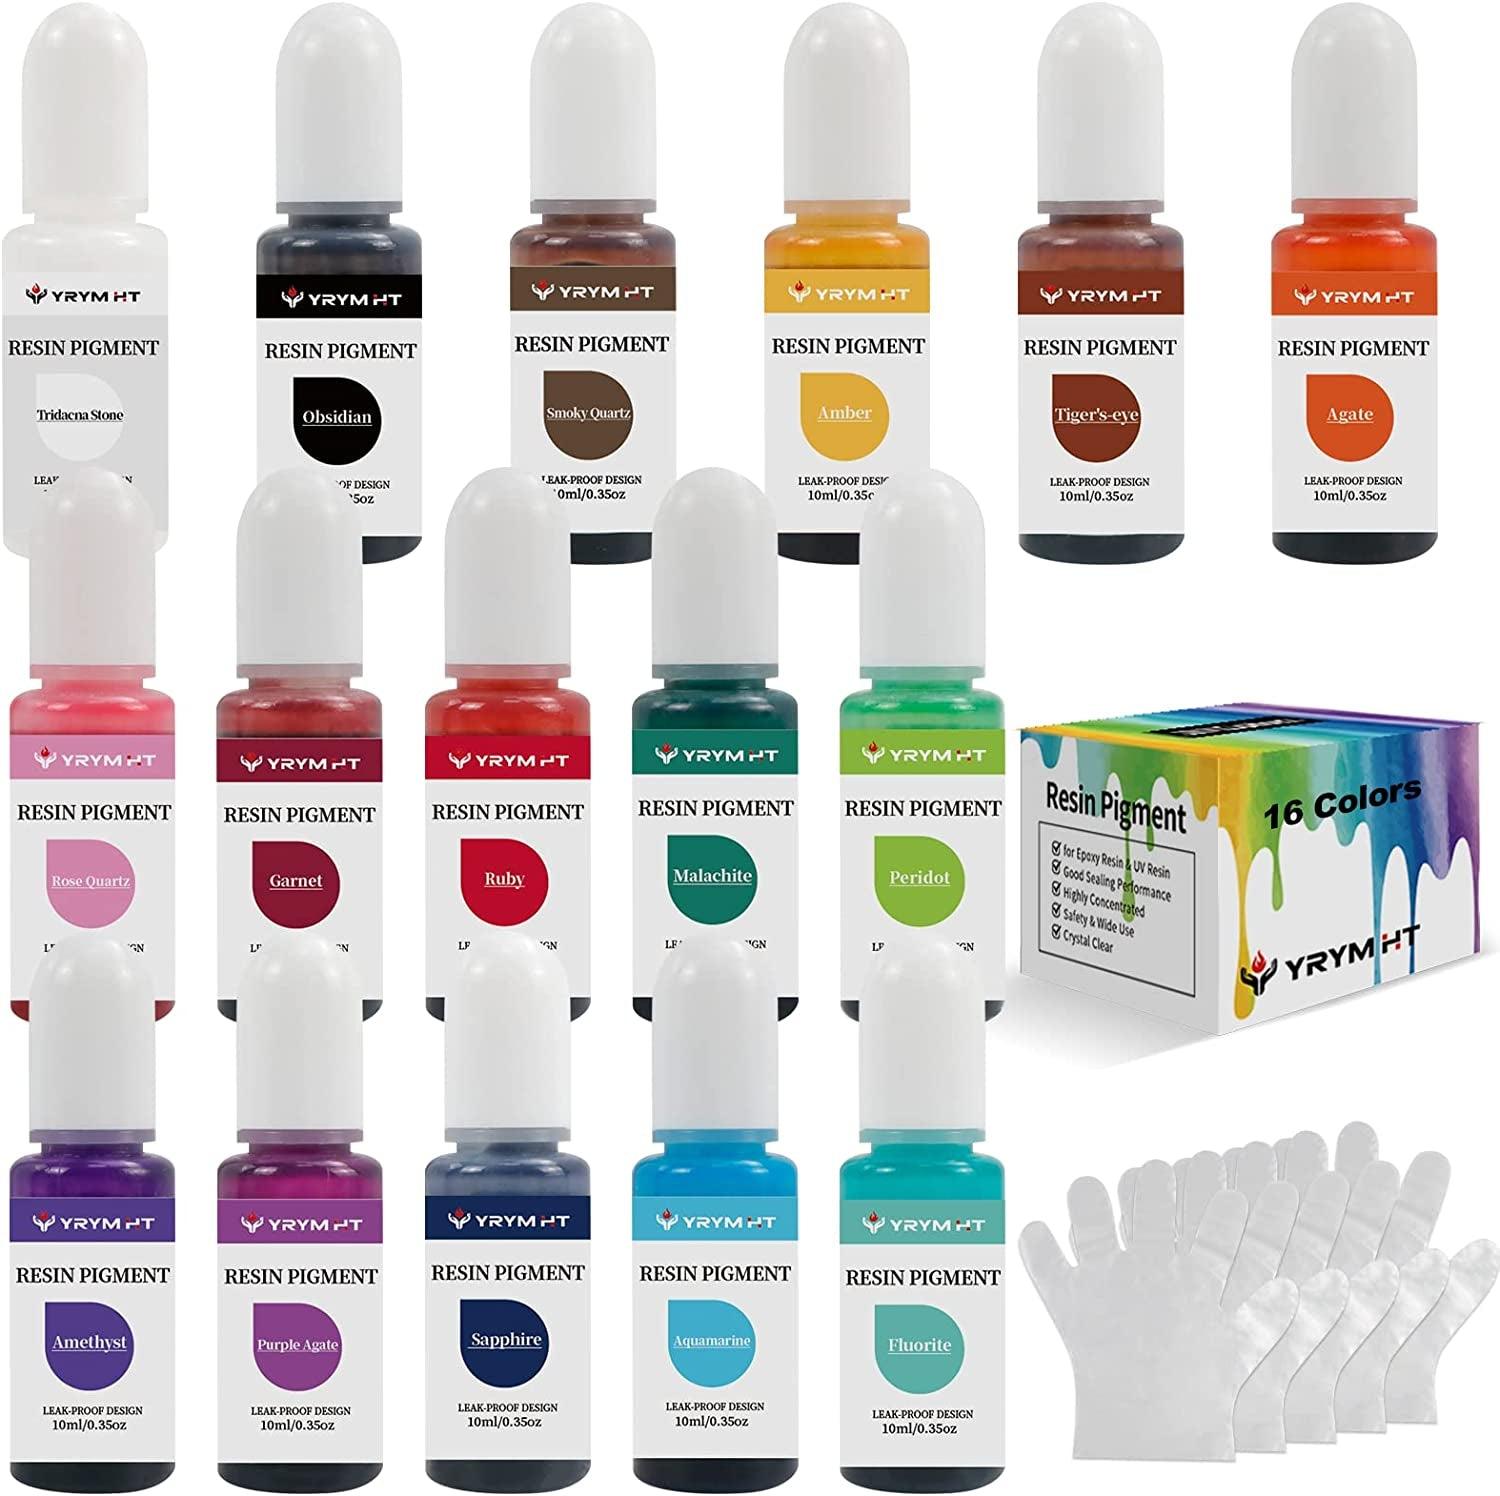 Concentrated Liquid Pigment, Dyes Pigments Epoxy Resin